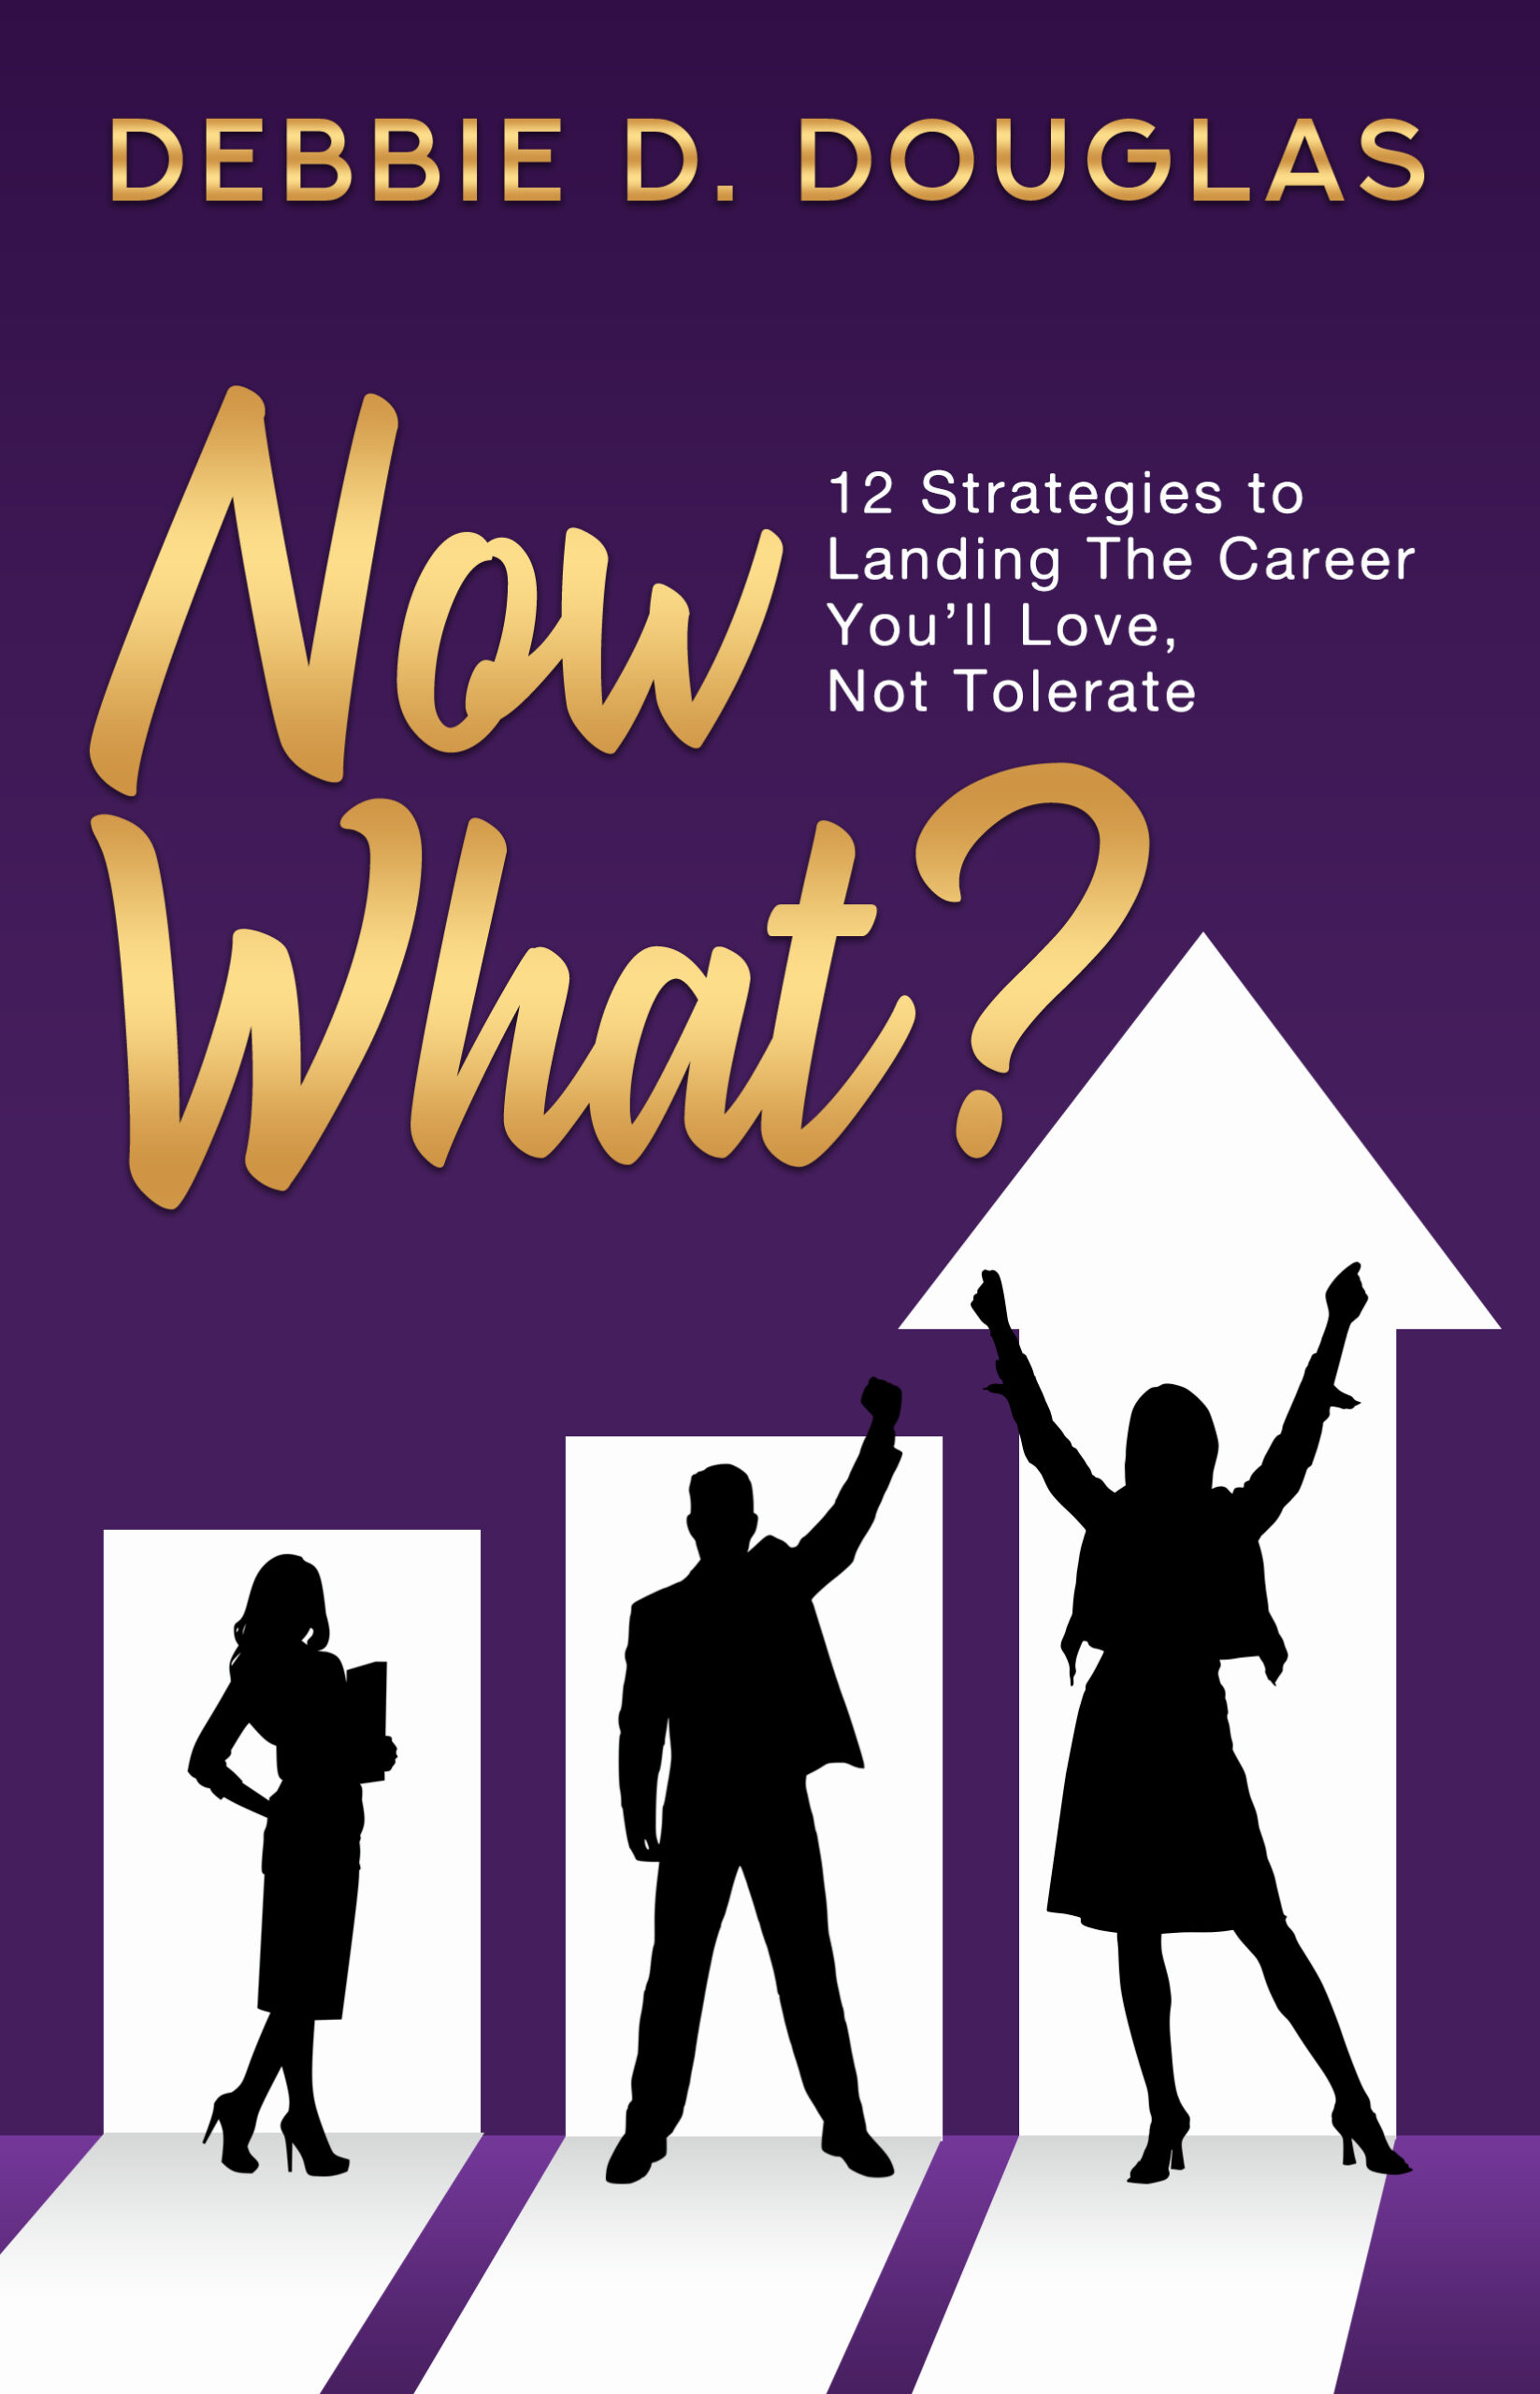 Now What: 12 Strategies to Landing The Career You’ll Love, Not Tolerate